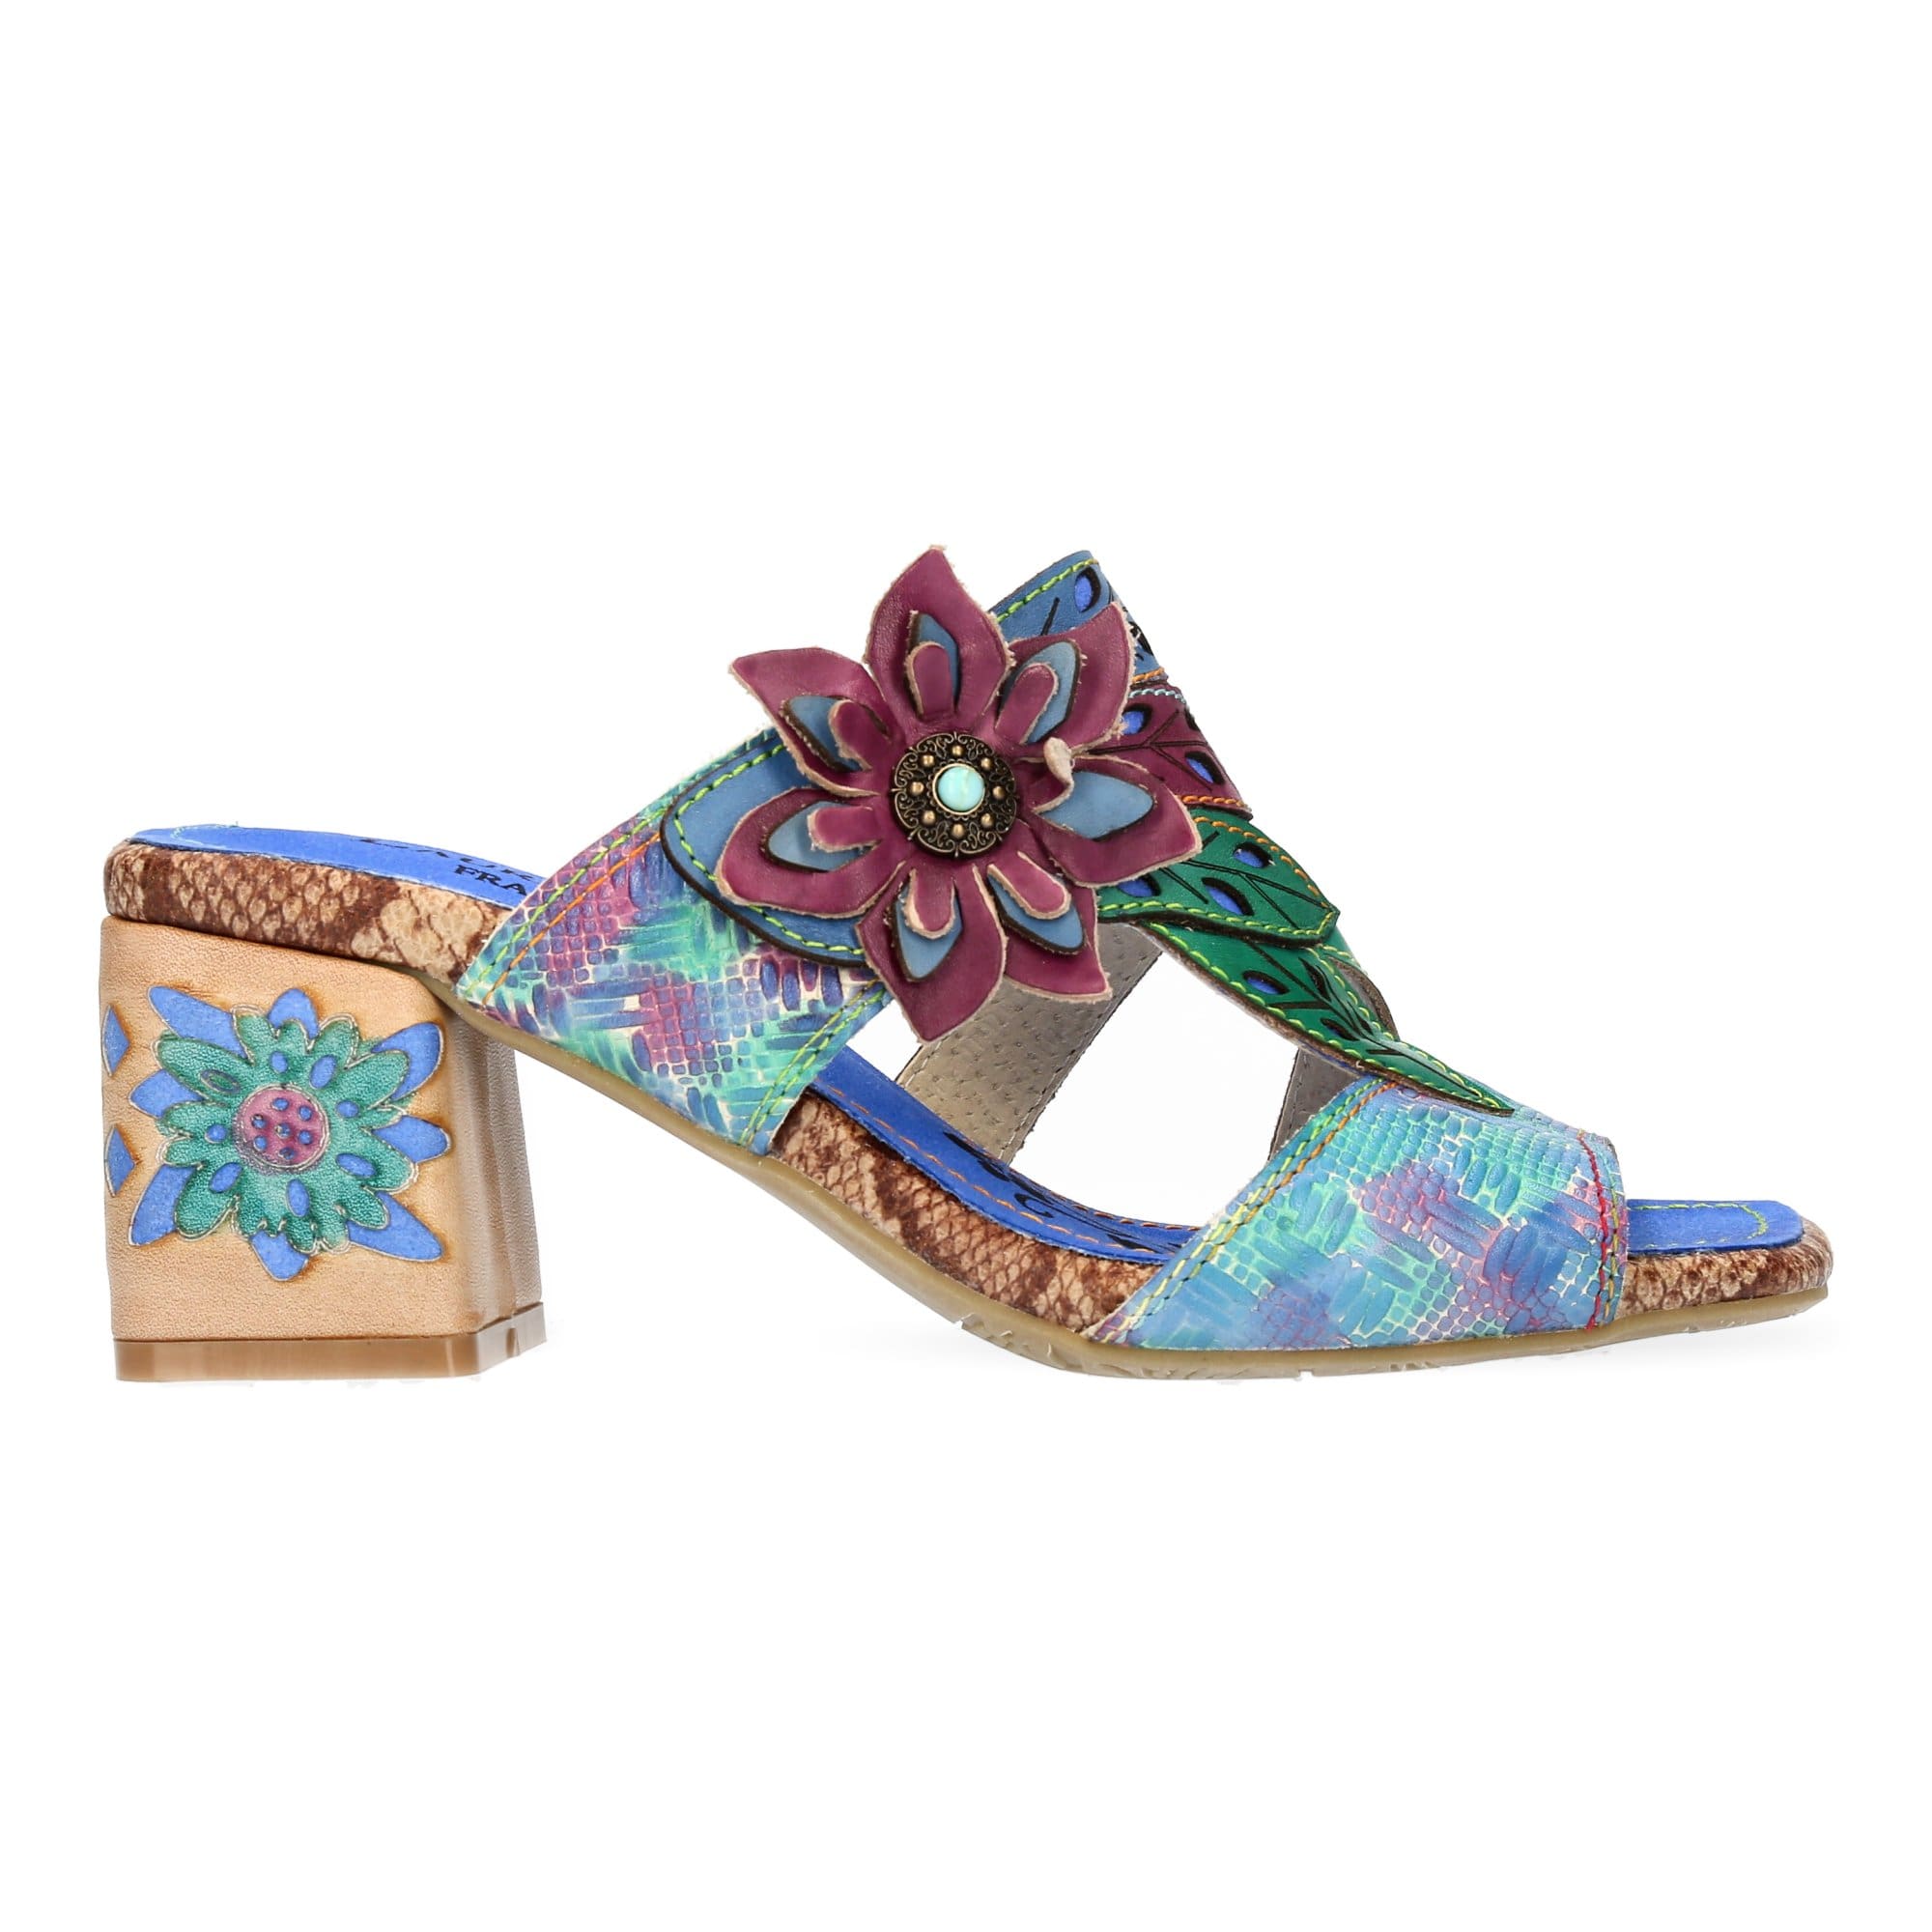 JACQUESO 02 shoes - 35 / Turquoise - Mule